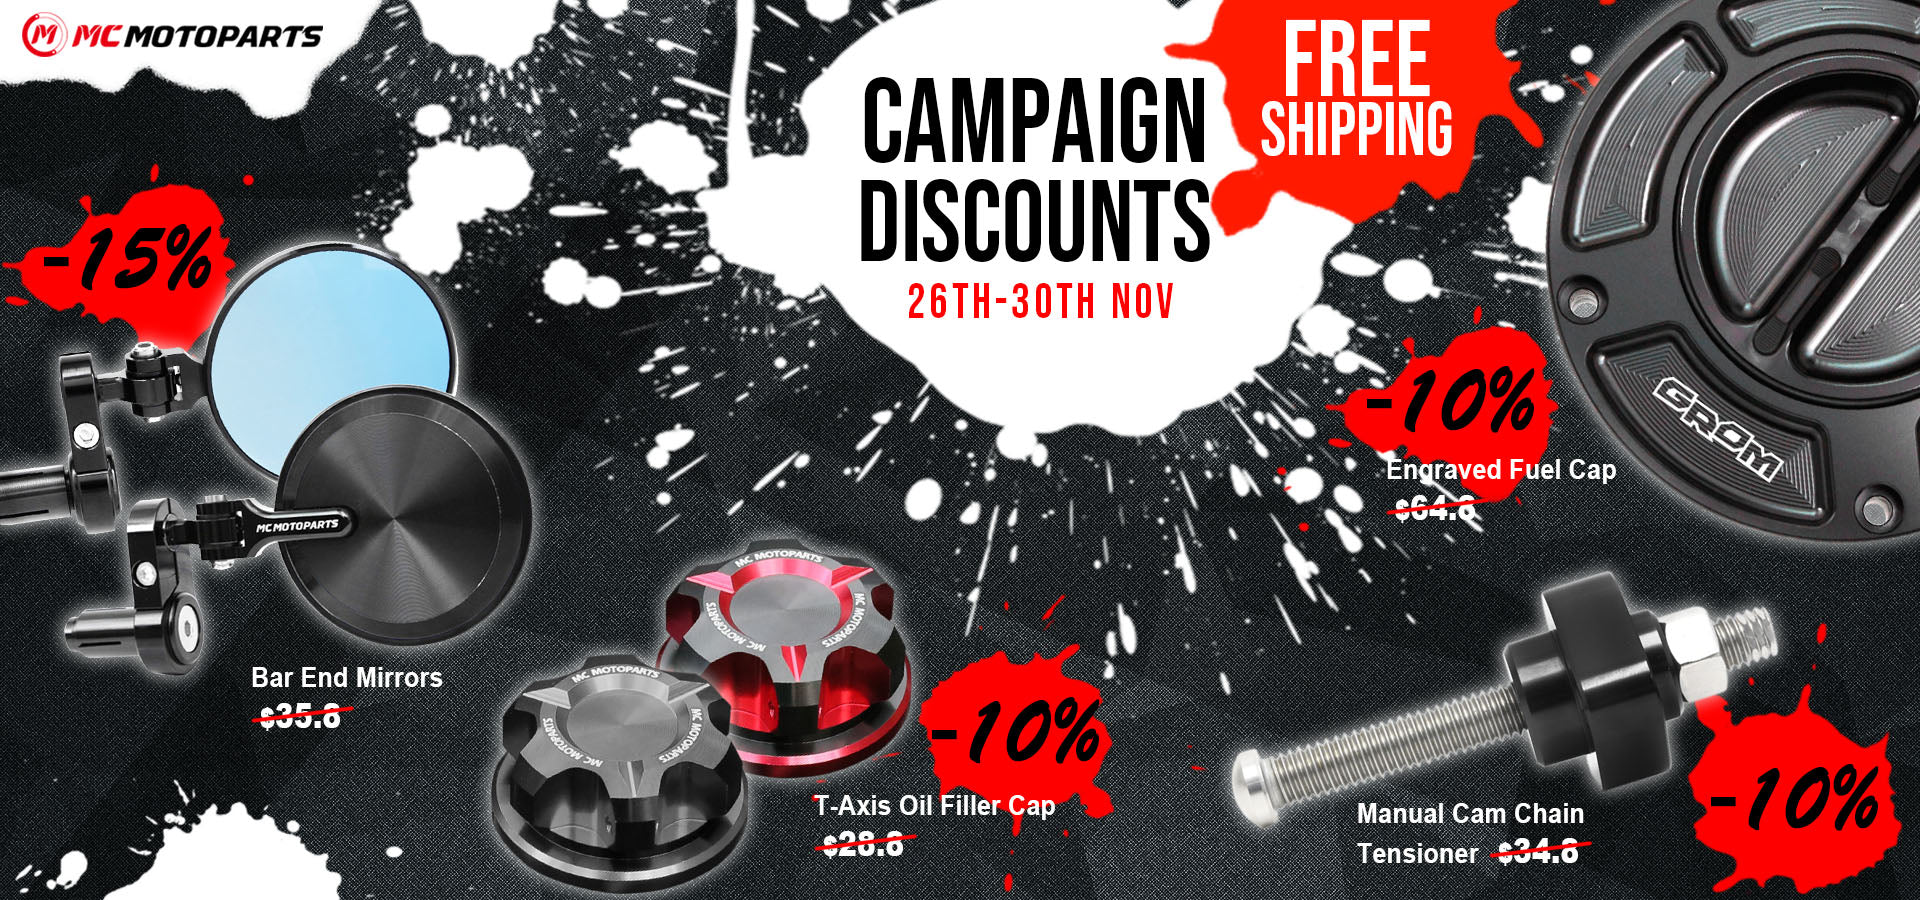 mc motoparts black friday & cyber monday campaign discount 2020 